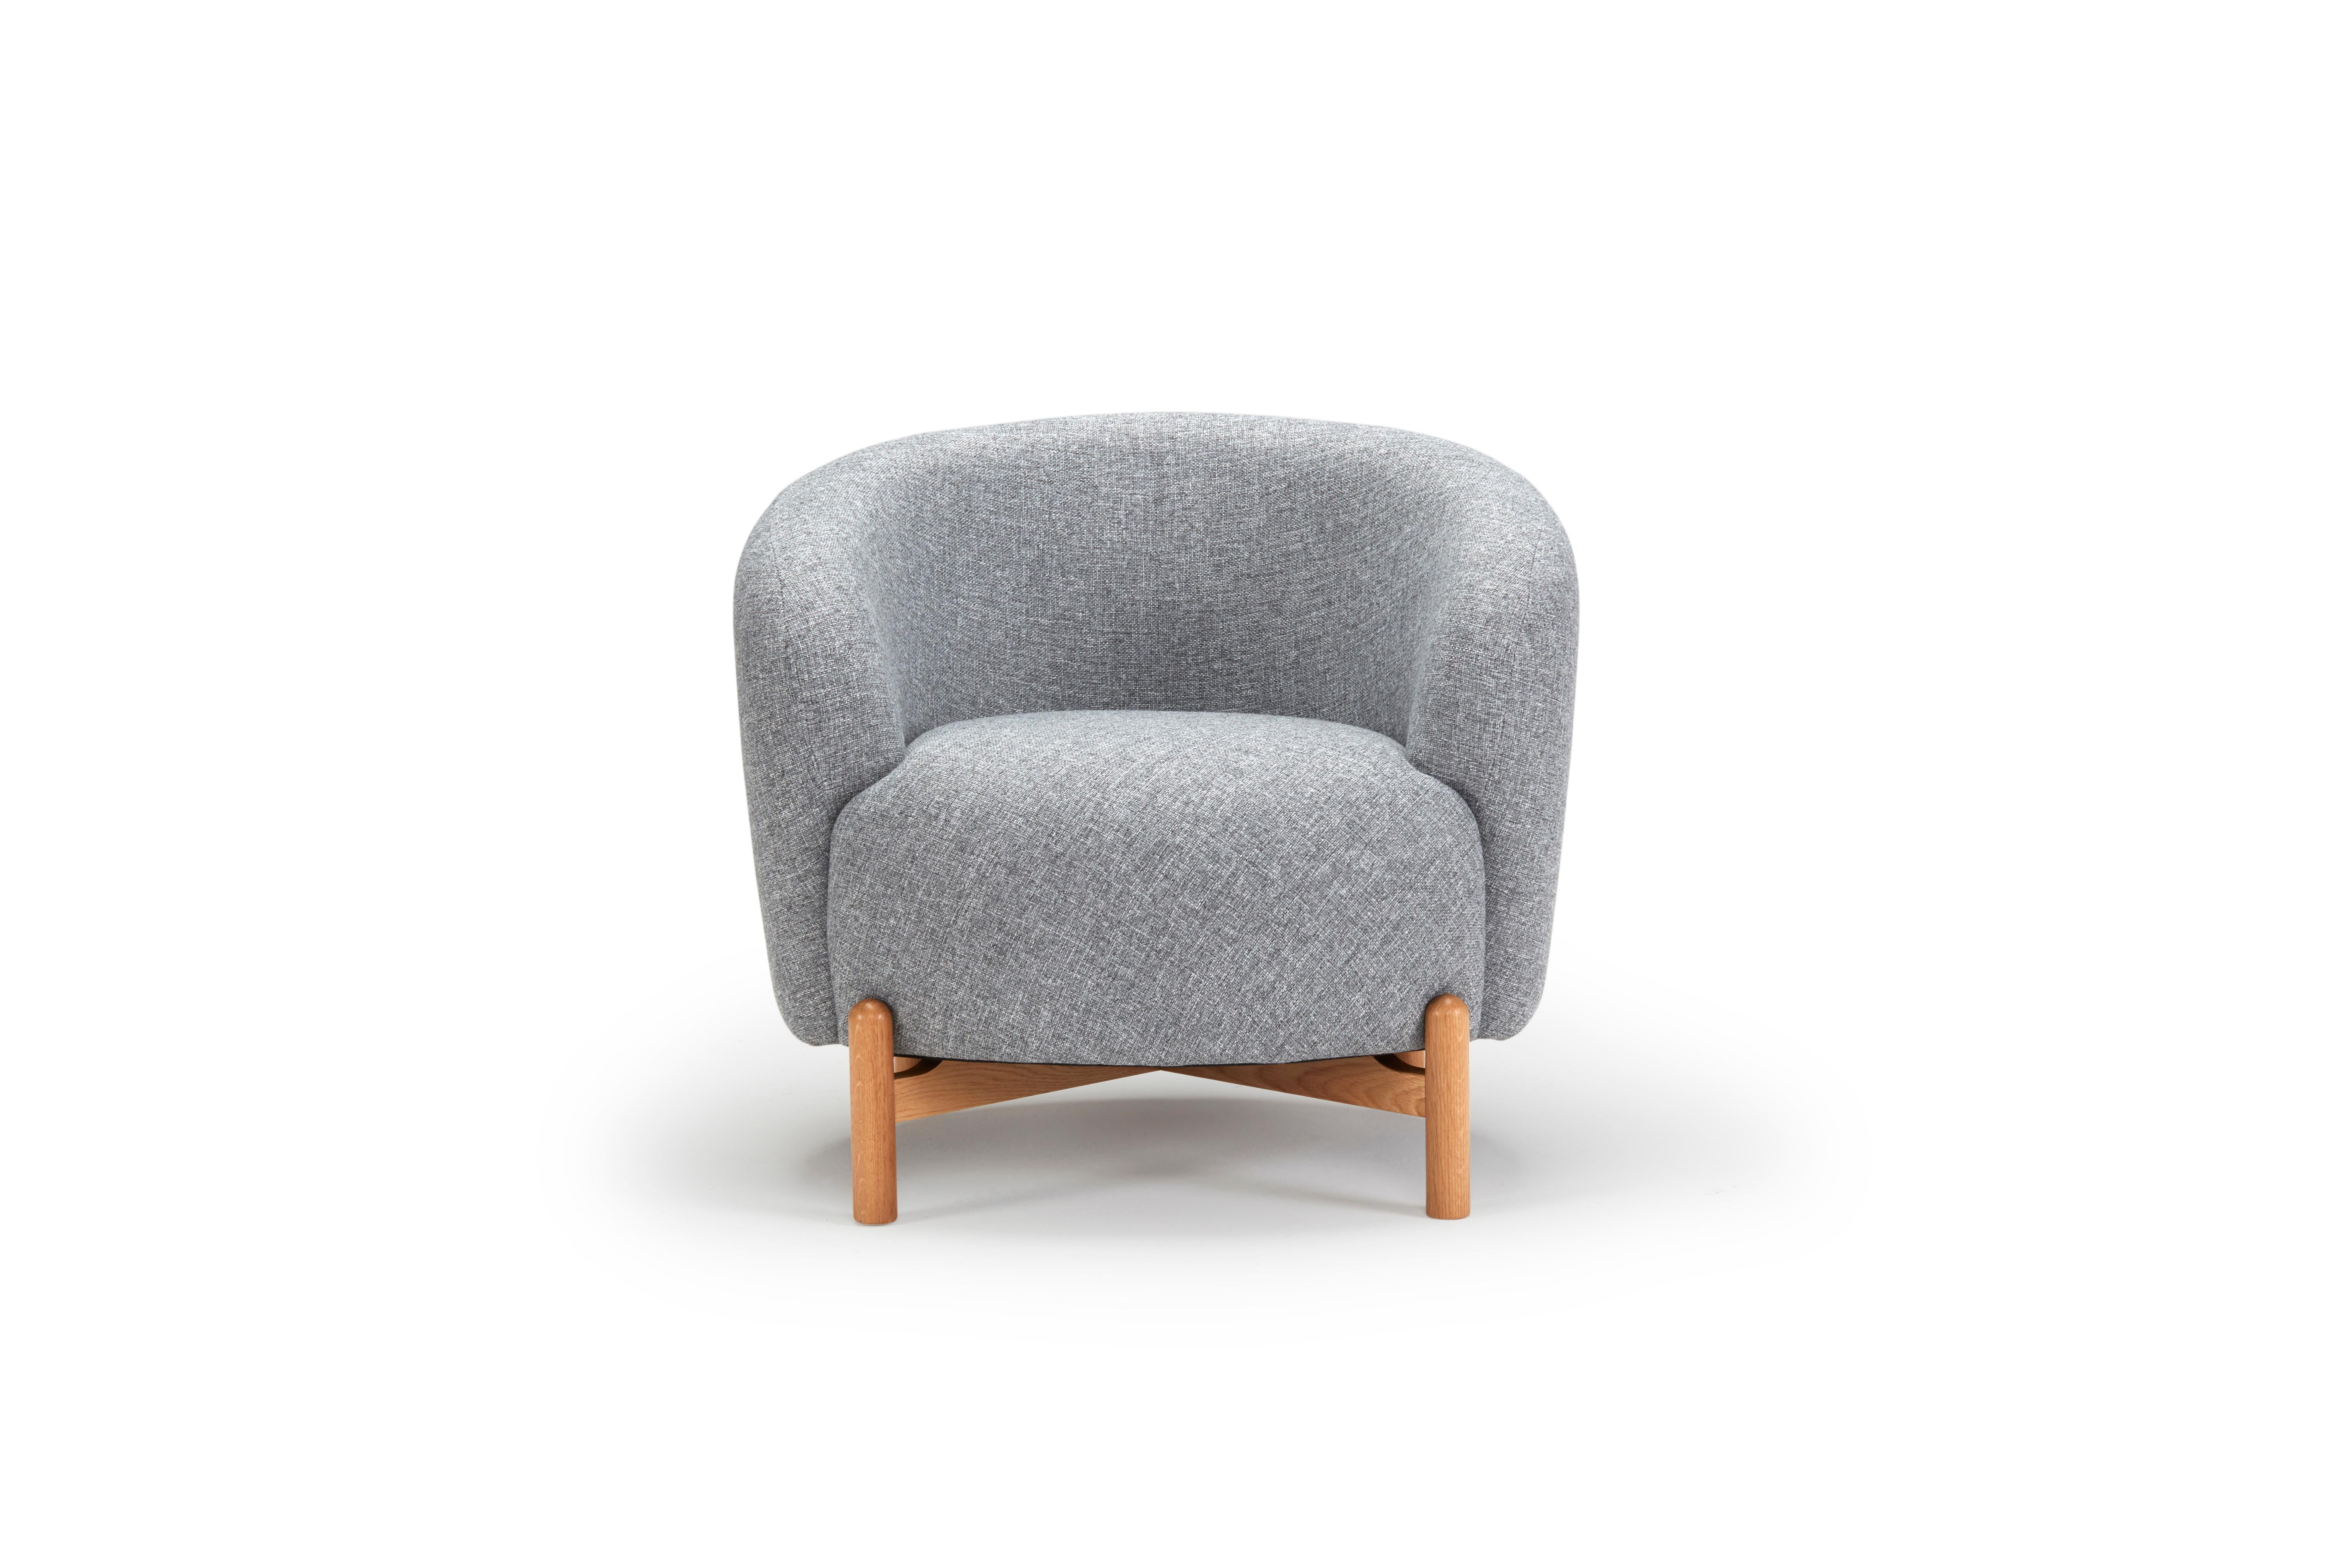 Luscious in its proportions but low key in terms of profile, the Glover is an OEM chair that is perfect for break out spaces and equally functional within hospitality as much as it is within a workplace setting.

Material - Wooden Base, Fire